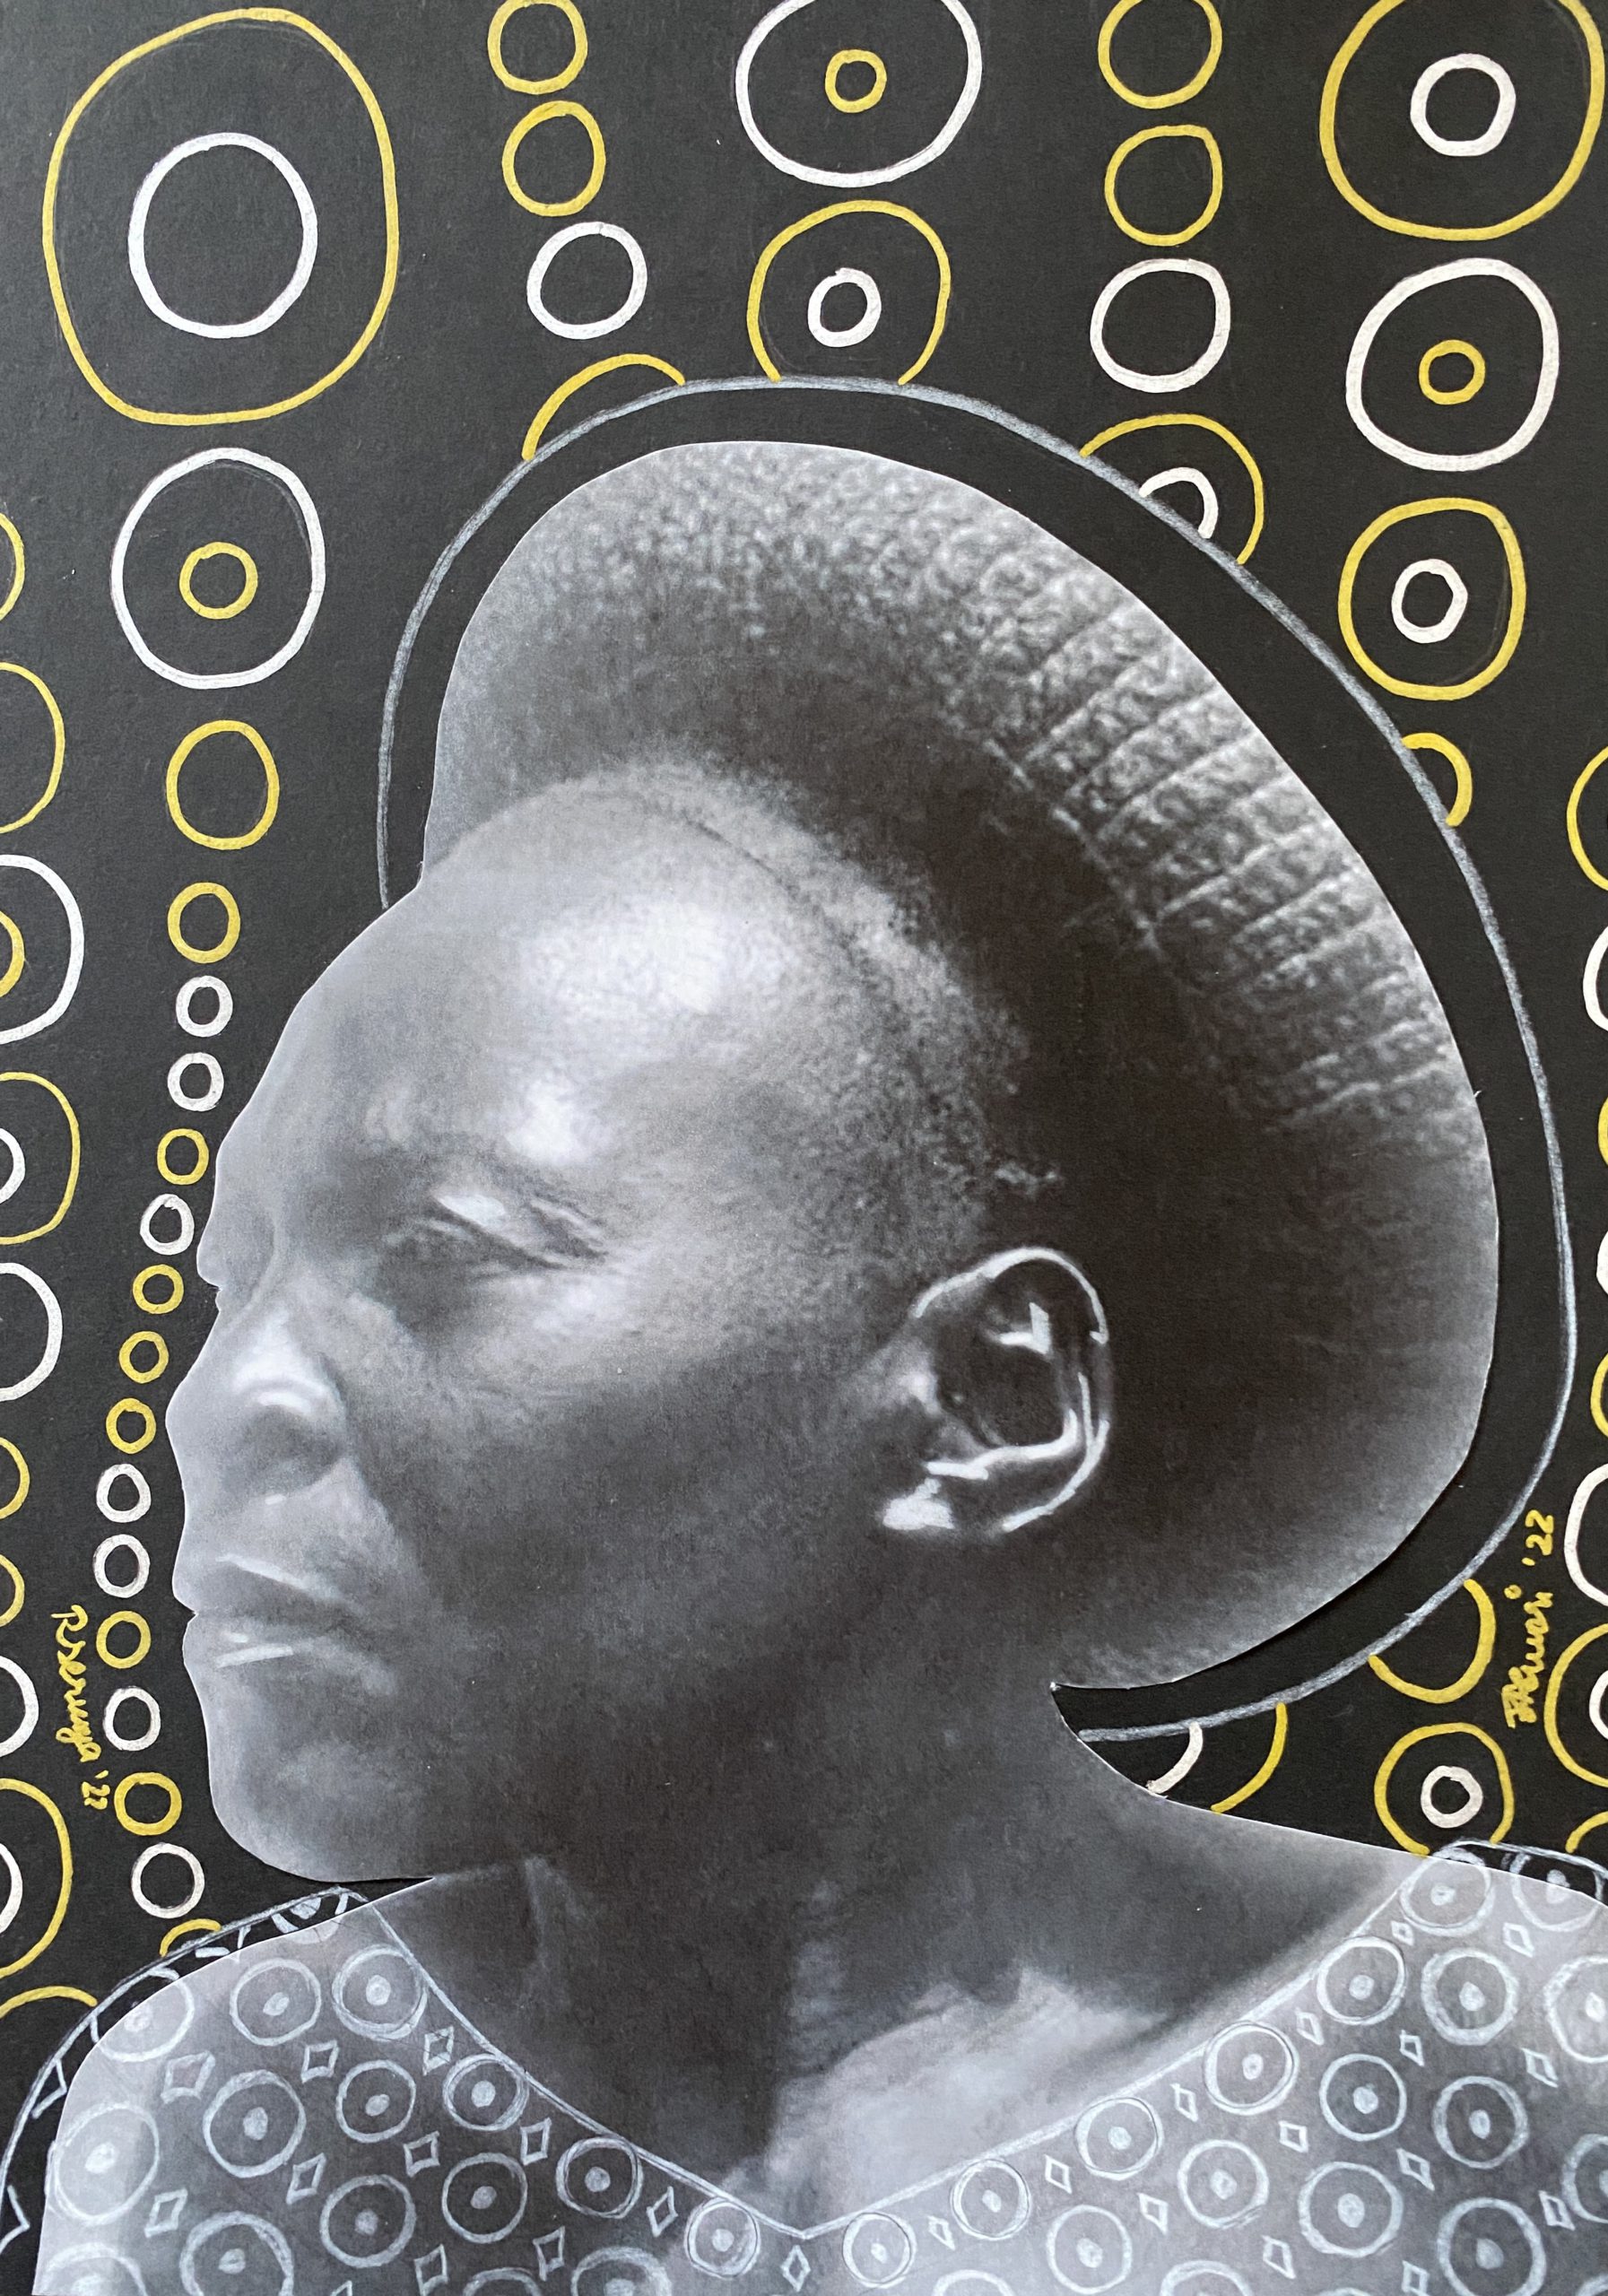 Chapa 5 (Image used: Woman from the Democratic Republic of Congo)